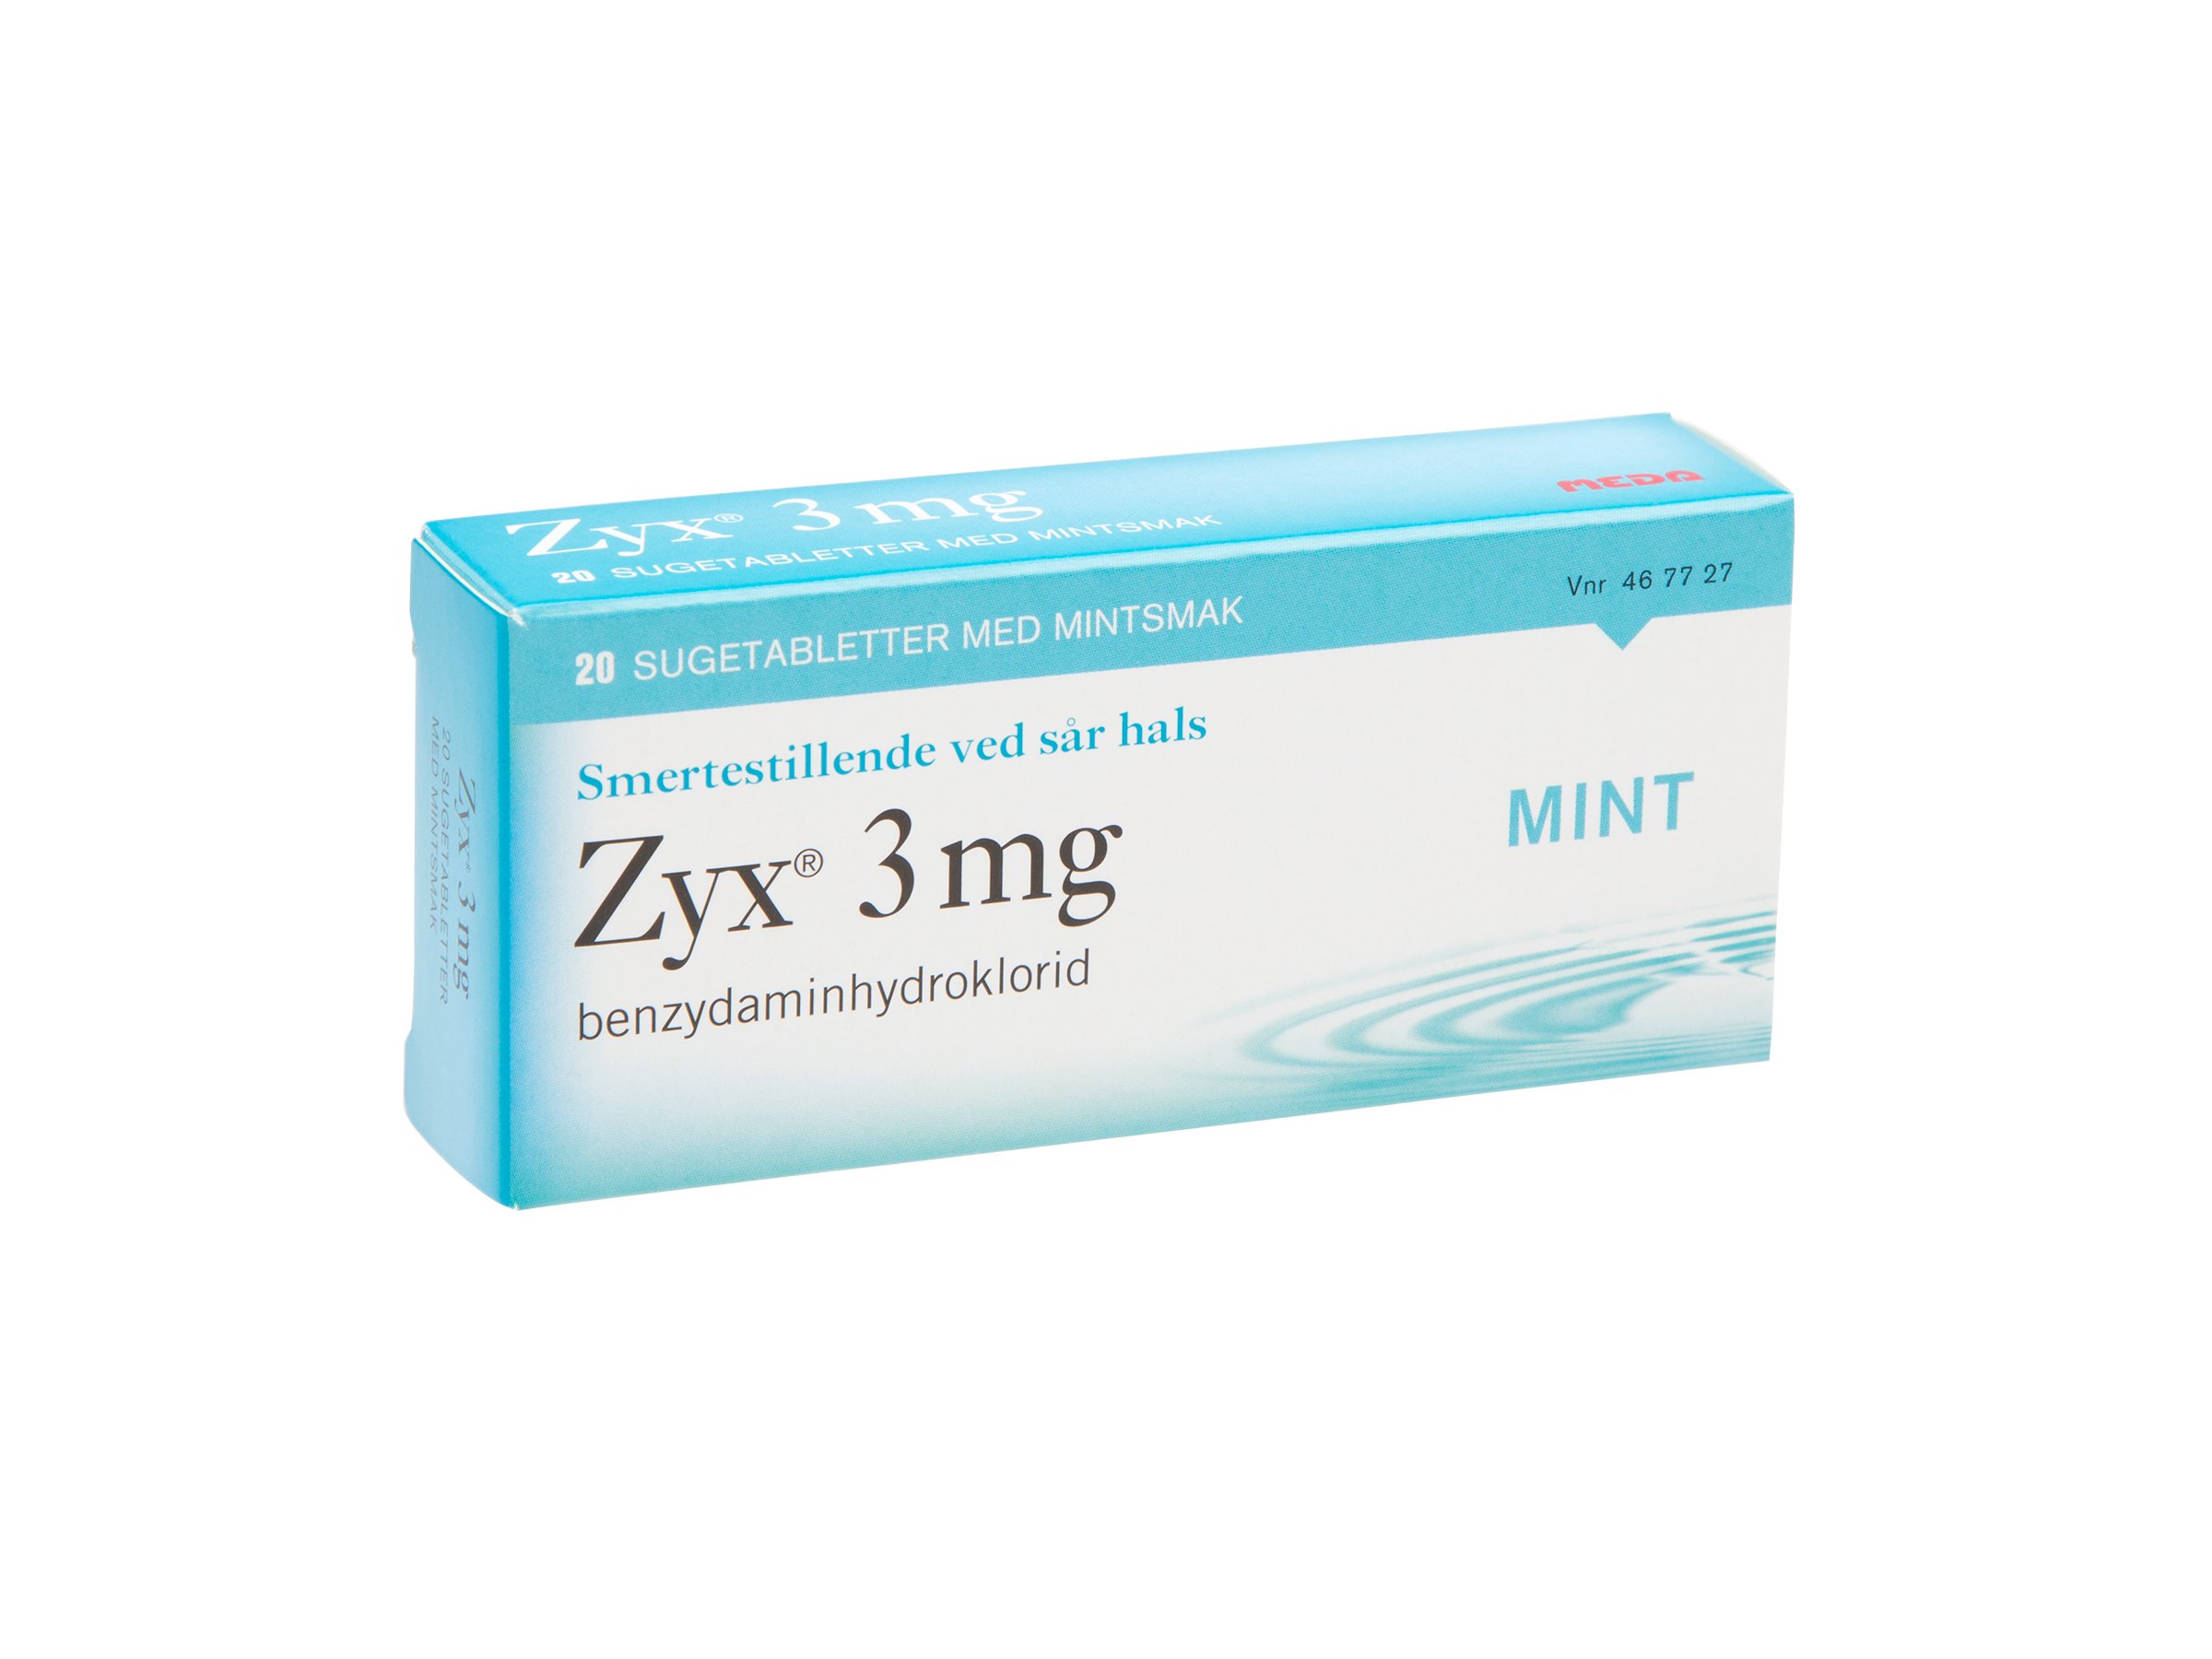 Zyx 3 mg mint sugetabletter, 2 x 10 stk.